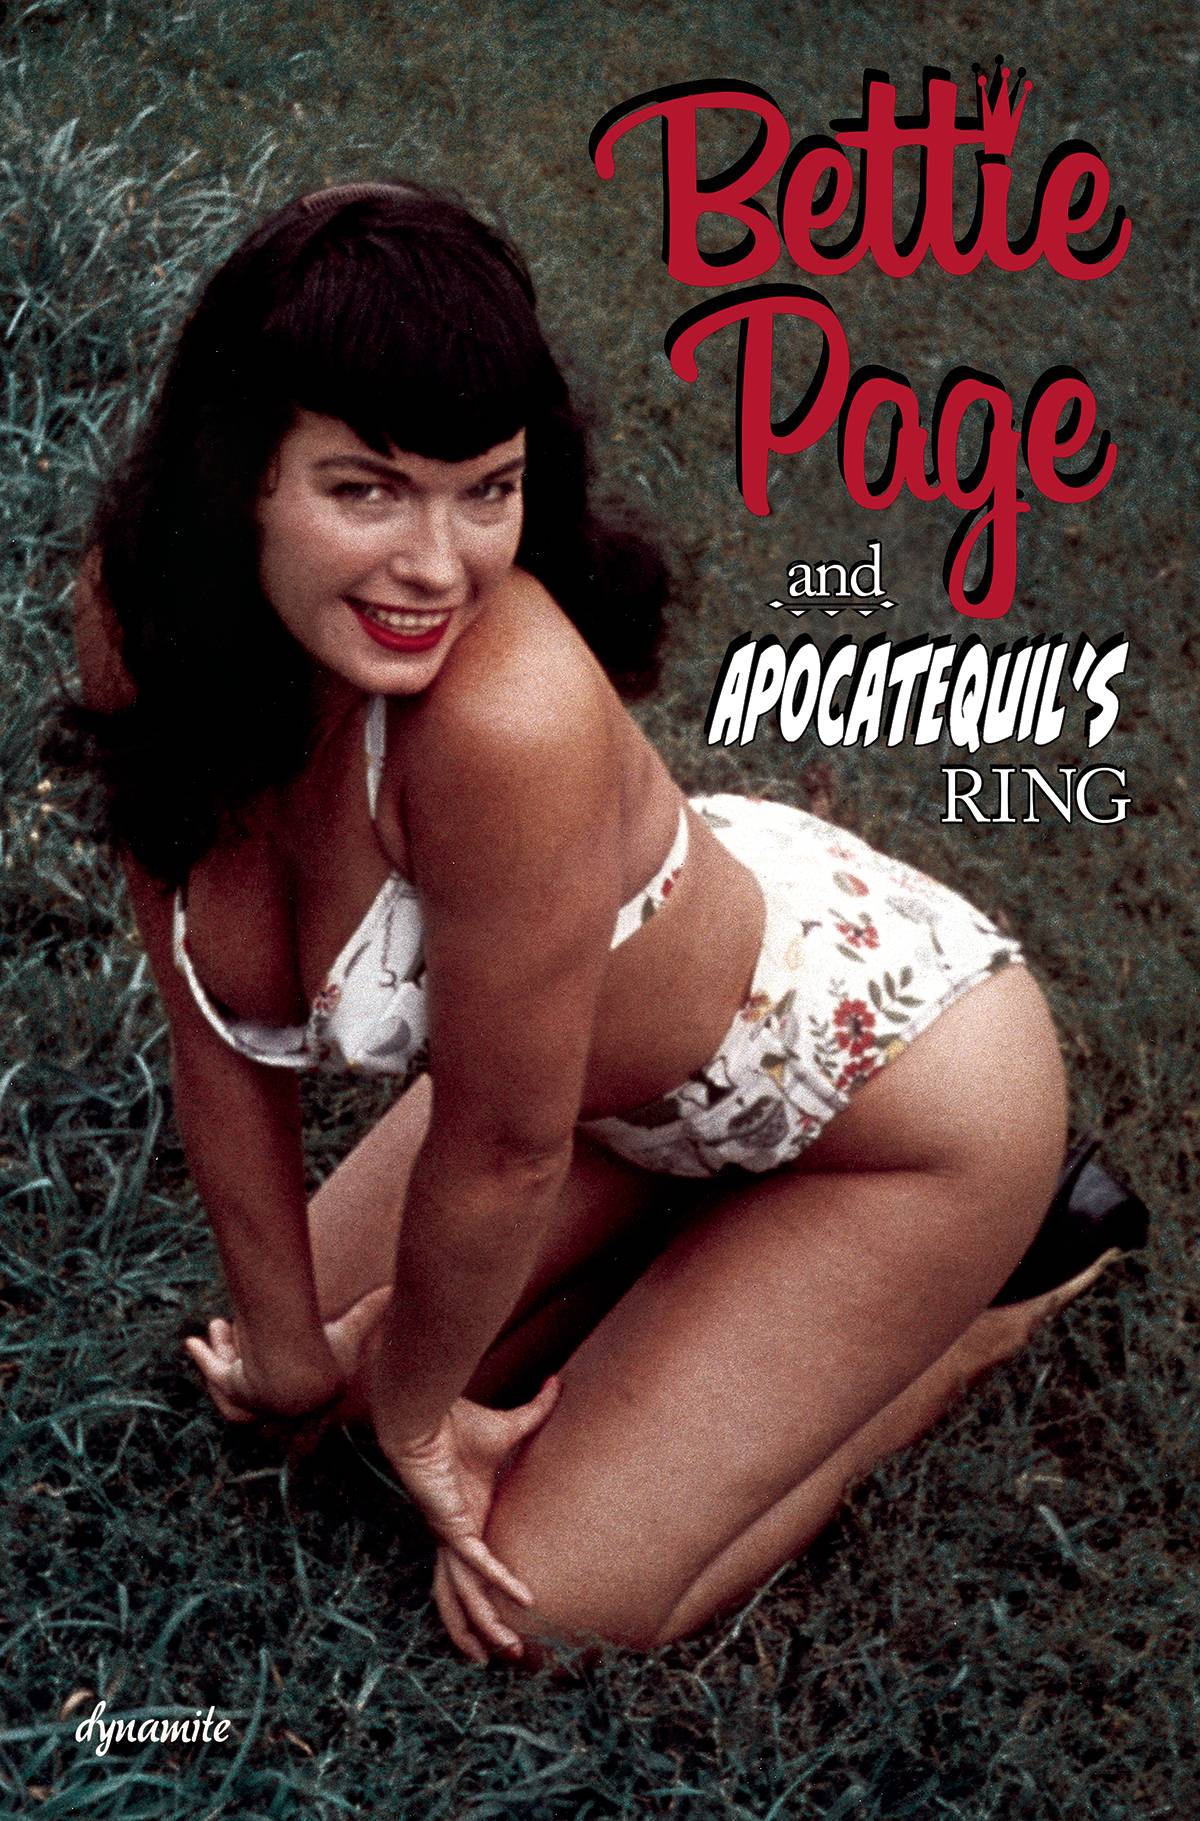 The One Stop Shop Comics & Games Bettie Page Apocatequils Ring Photo Cvr (C: 0-1-2) (11/02/2022) DYNAMITE